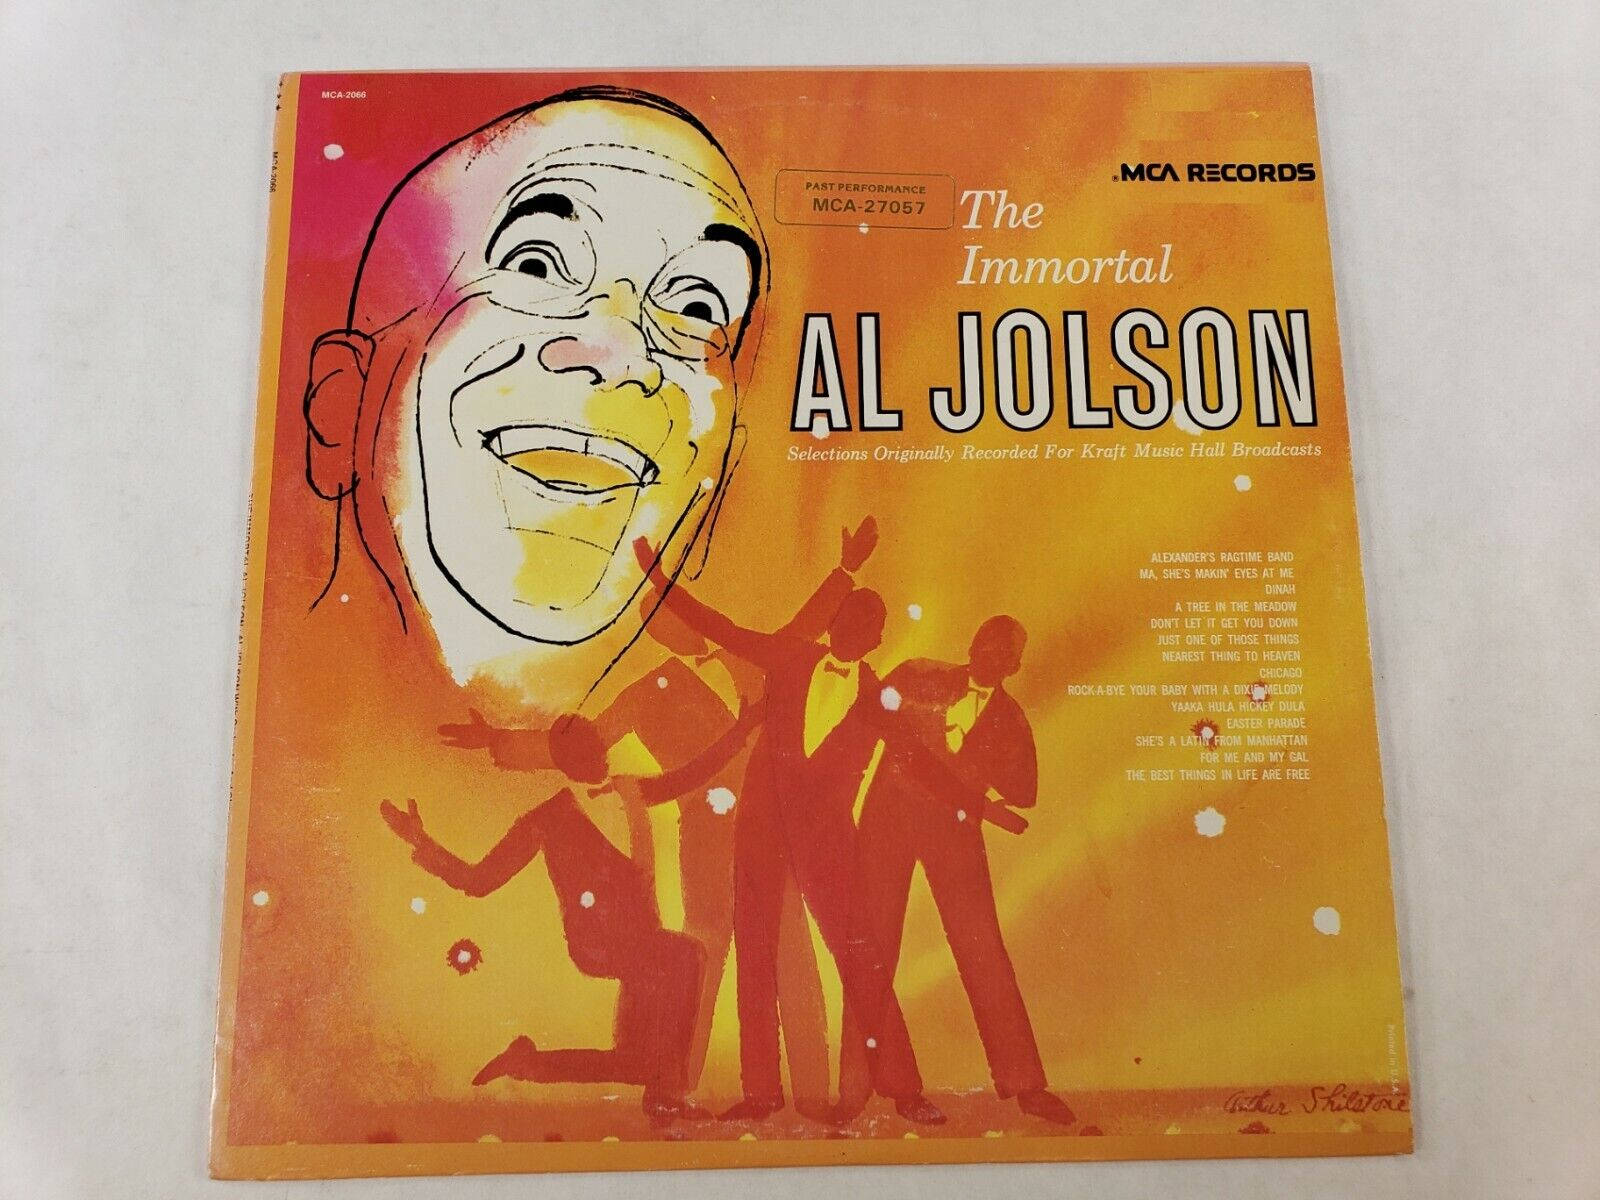 Al Jolson, prolific performer and influential figure in the entertainment industry Wallpaper